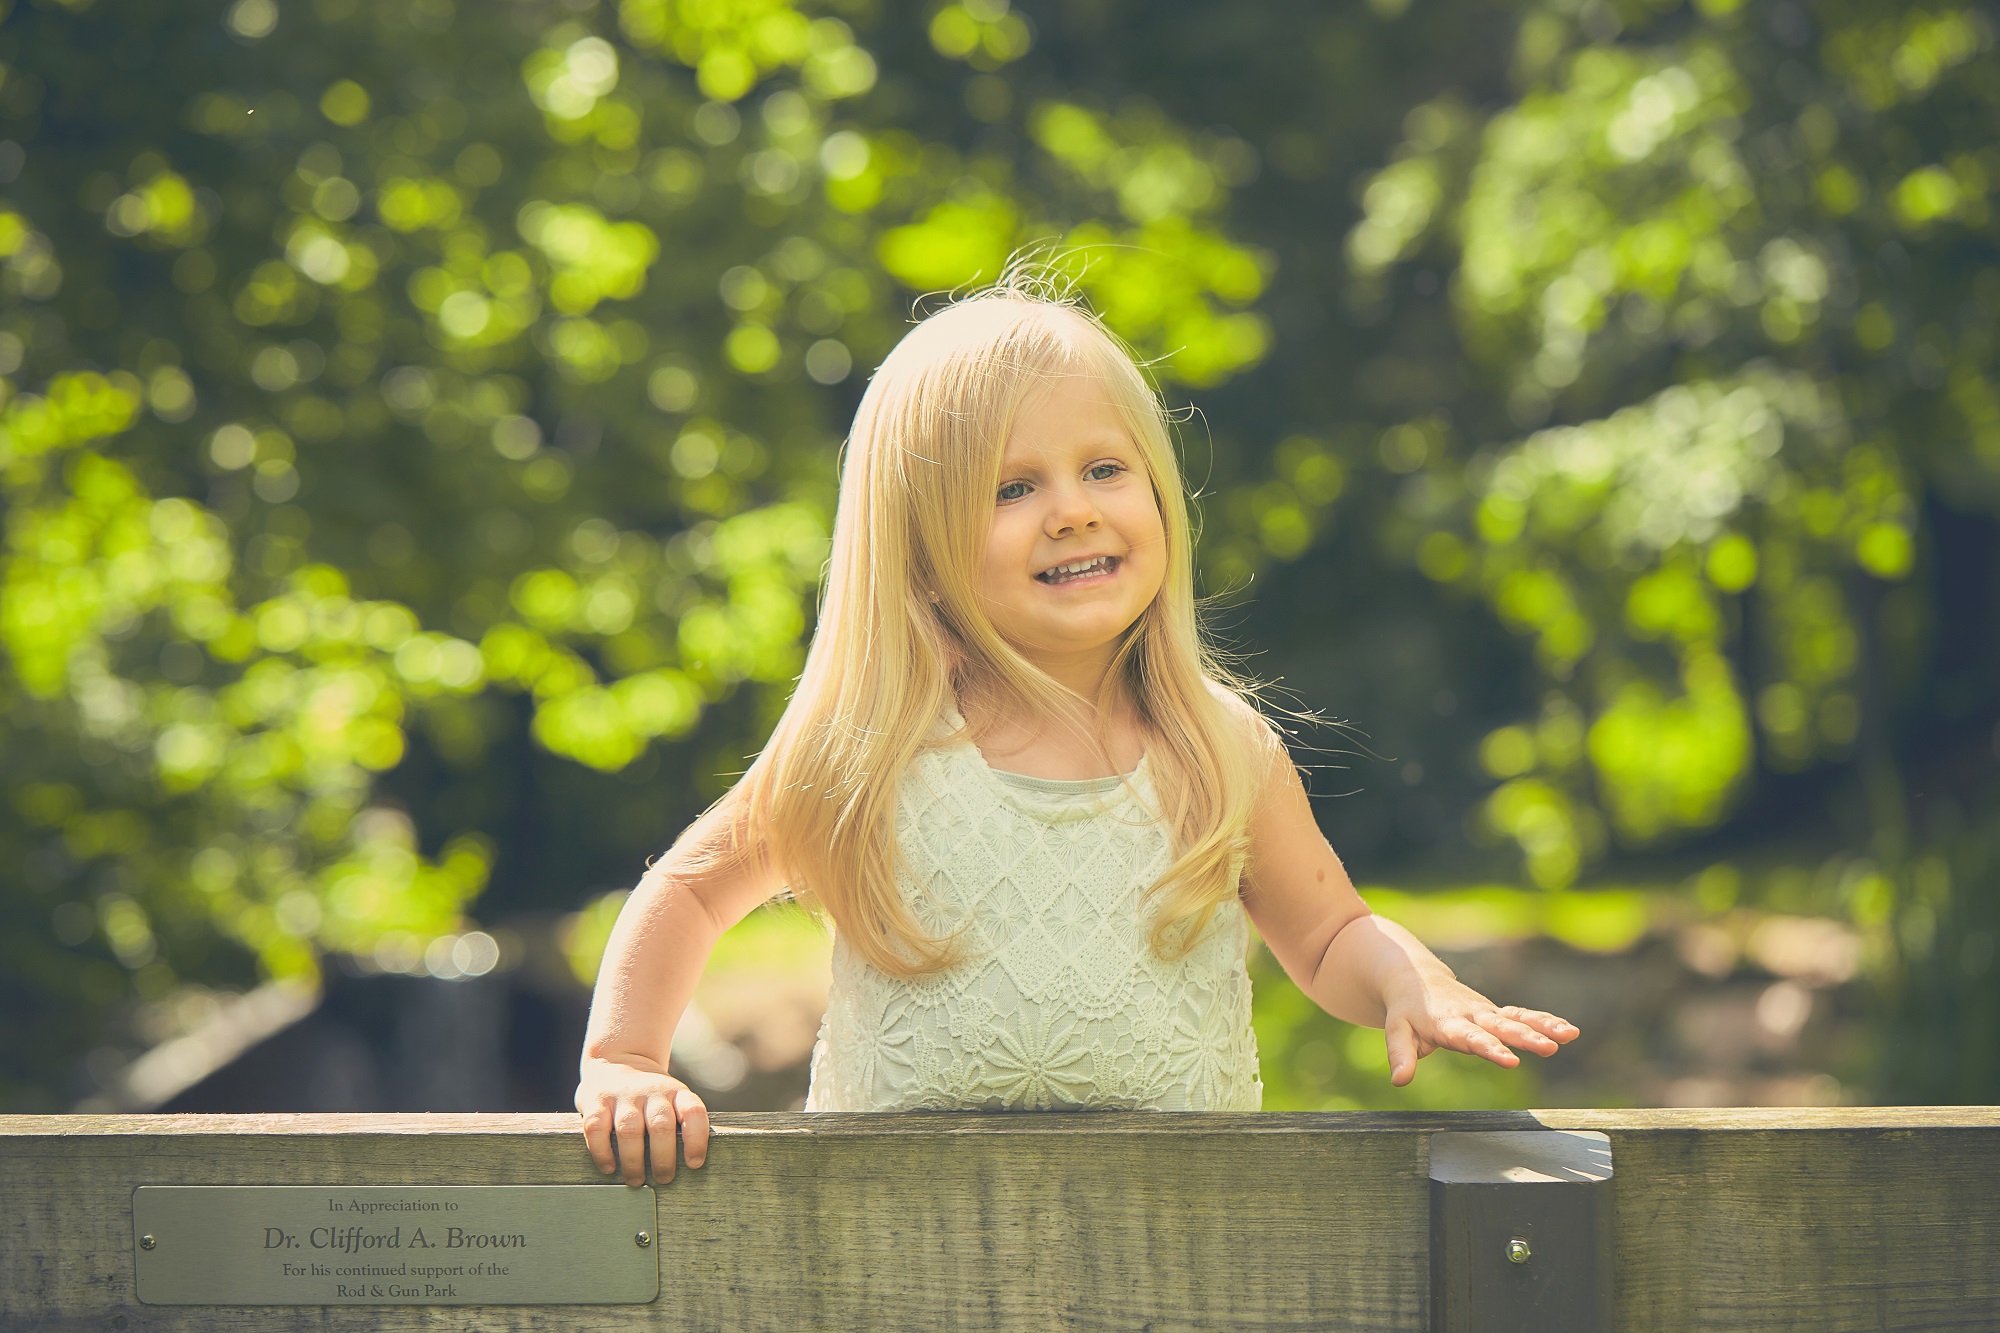 Scottish little girl wearing white dress standing on bench in the park smiling brightly on sunny day